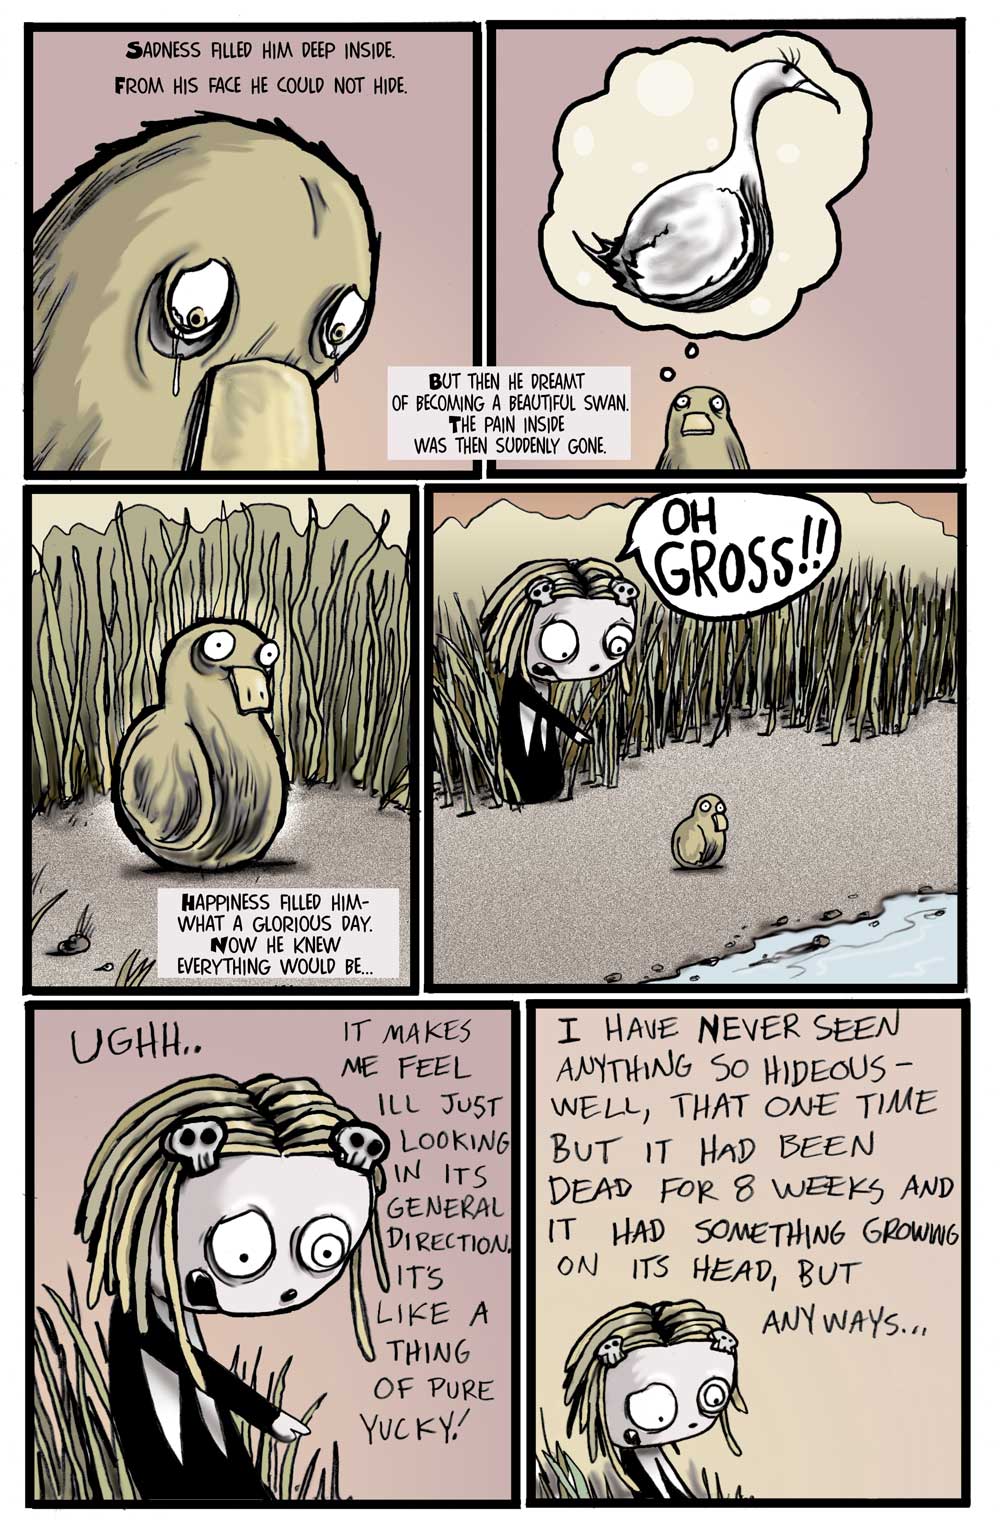 Lenore_Fugly-Duckling-Page-2.jpg